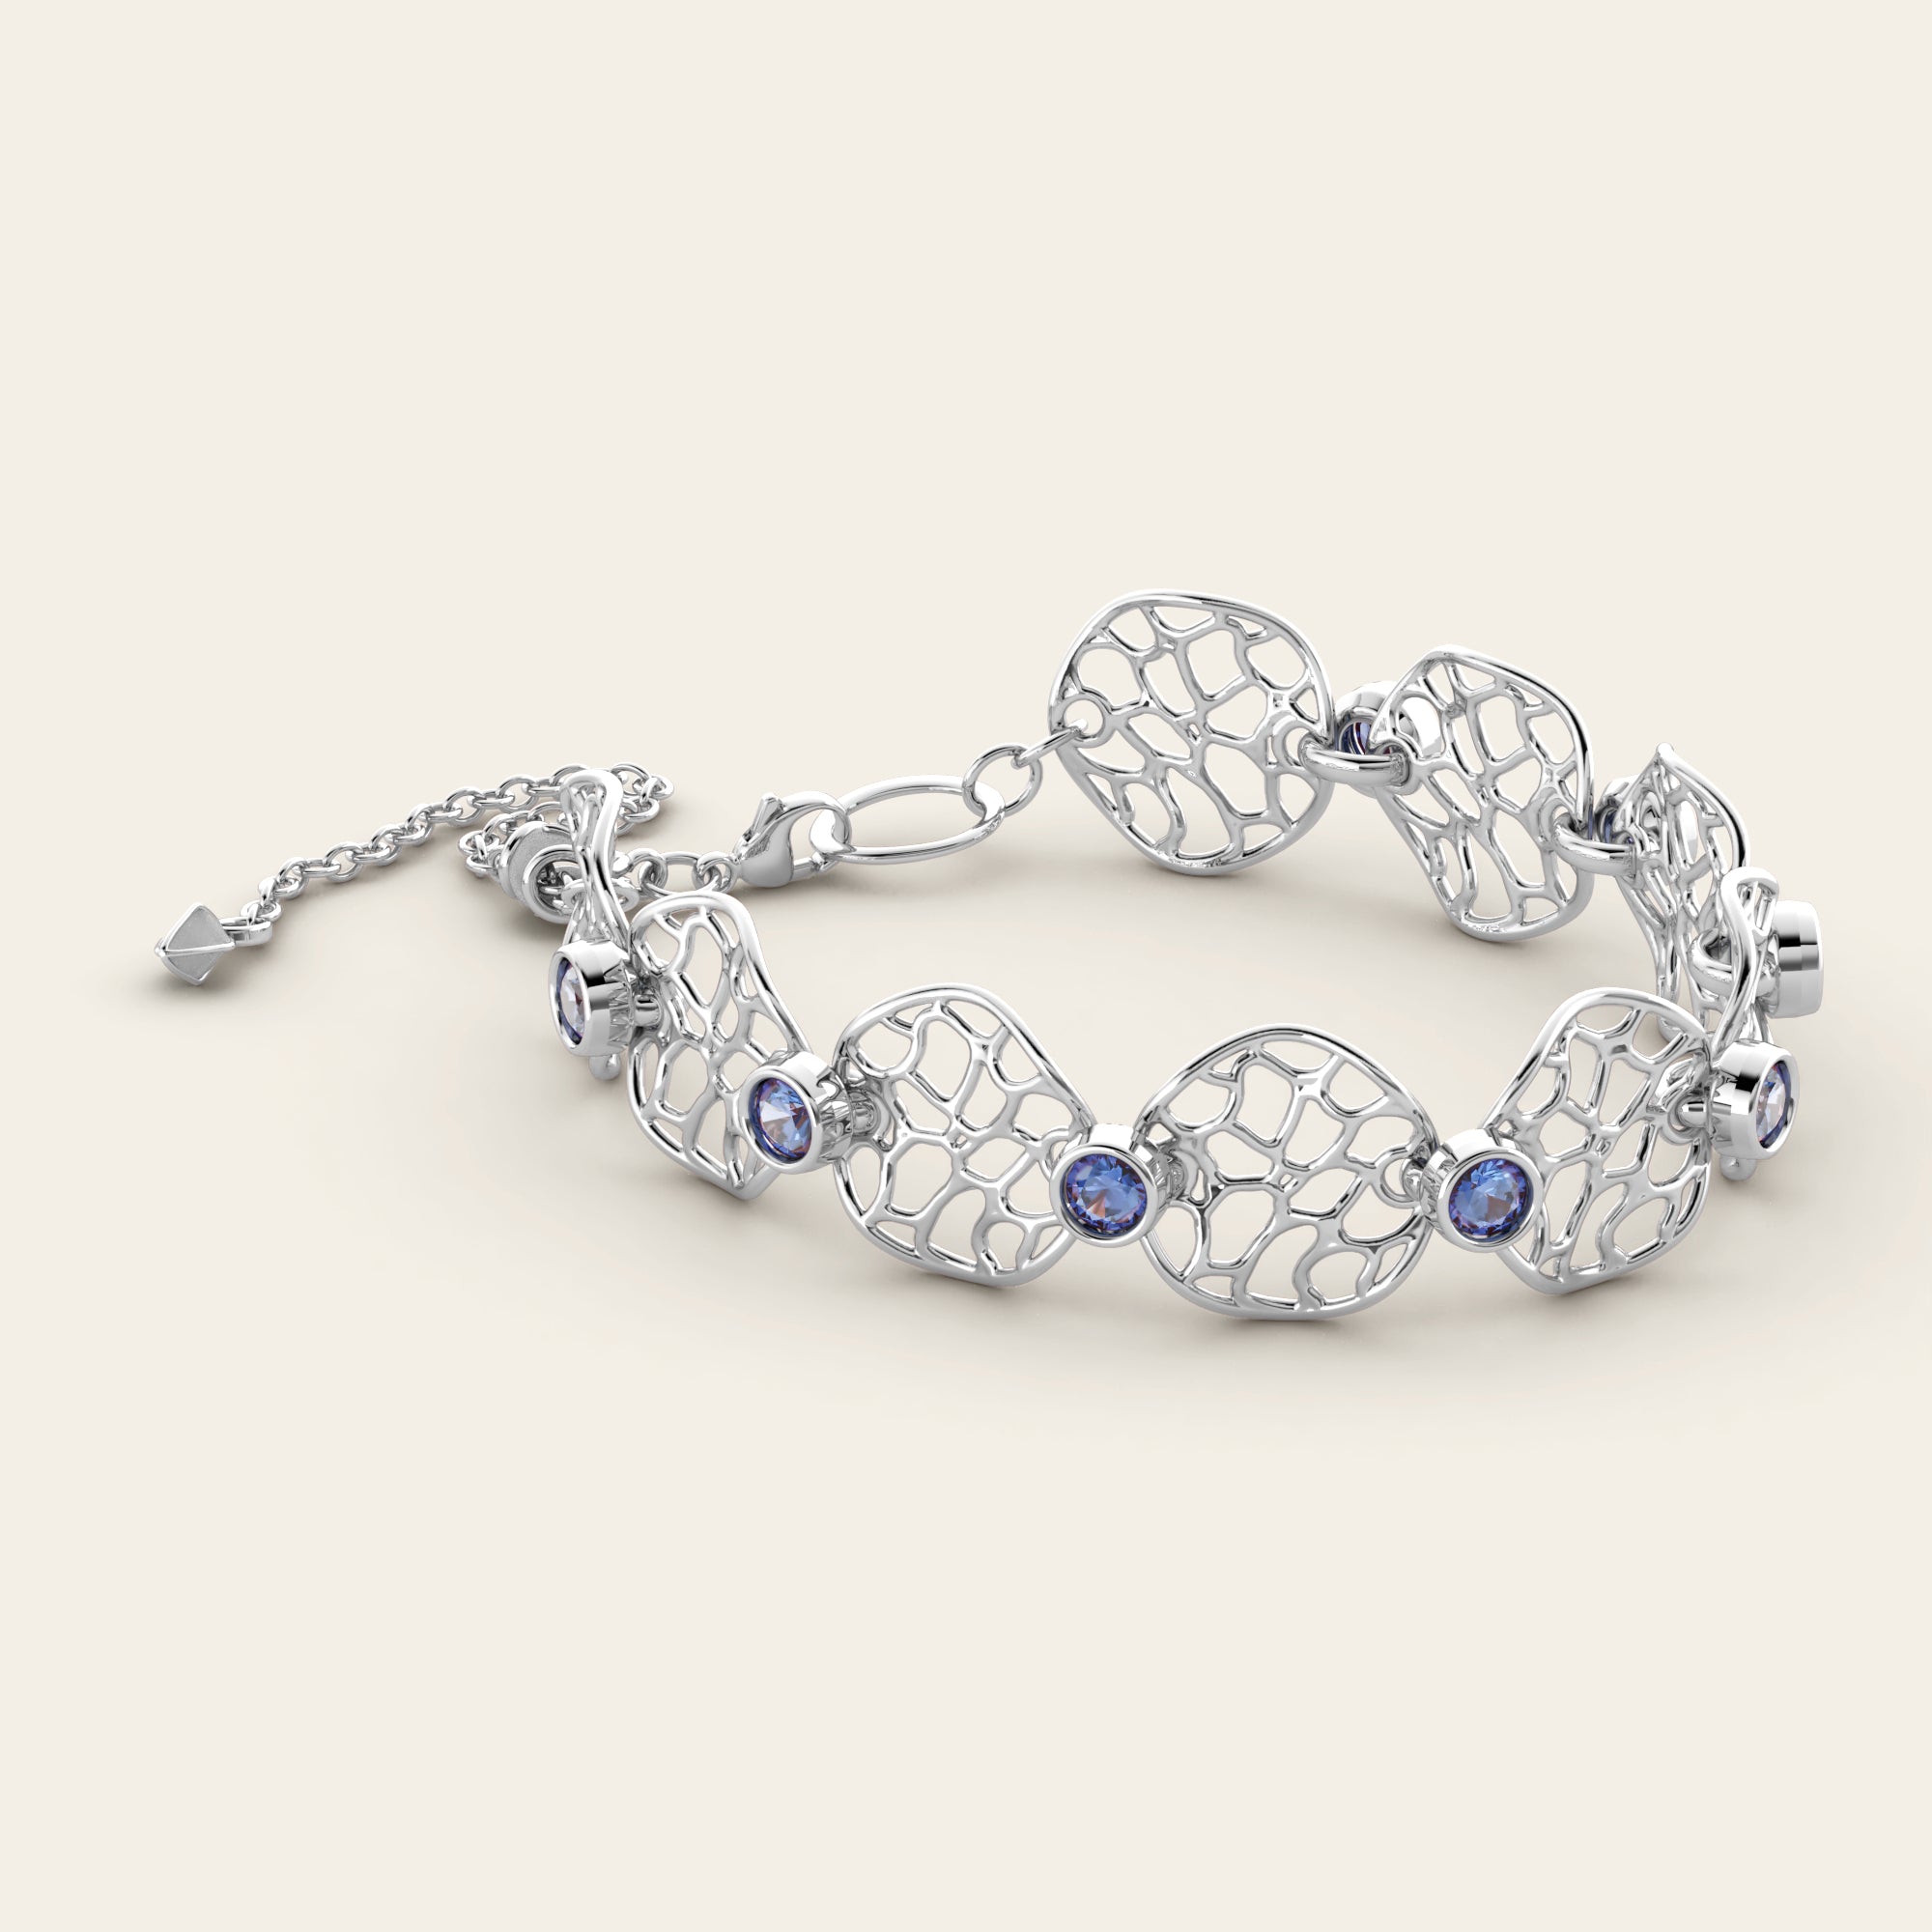 Cracked Earth Linked Bracelet with Purple/Blue Sapphires in 18k White Gold